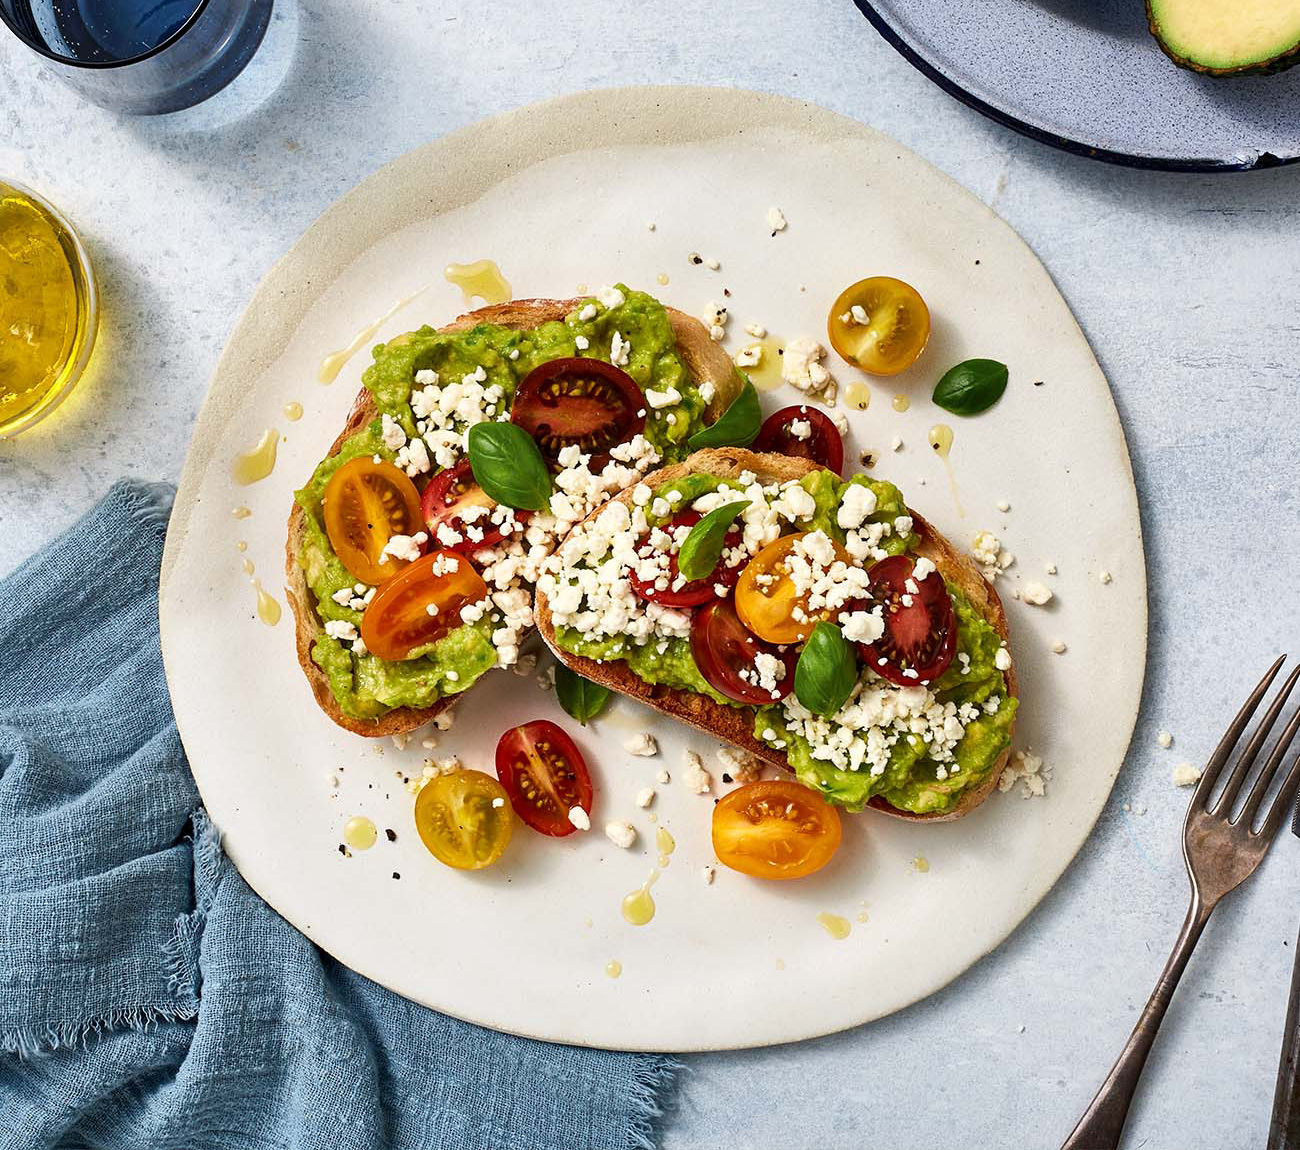 https://foodhub.scene7.com/is/image/woolworthsltdprod/smashed-avo-and-crumbled-fetta-on-toast:Mobile-1300x1150